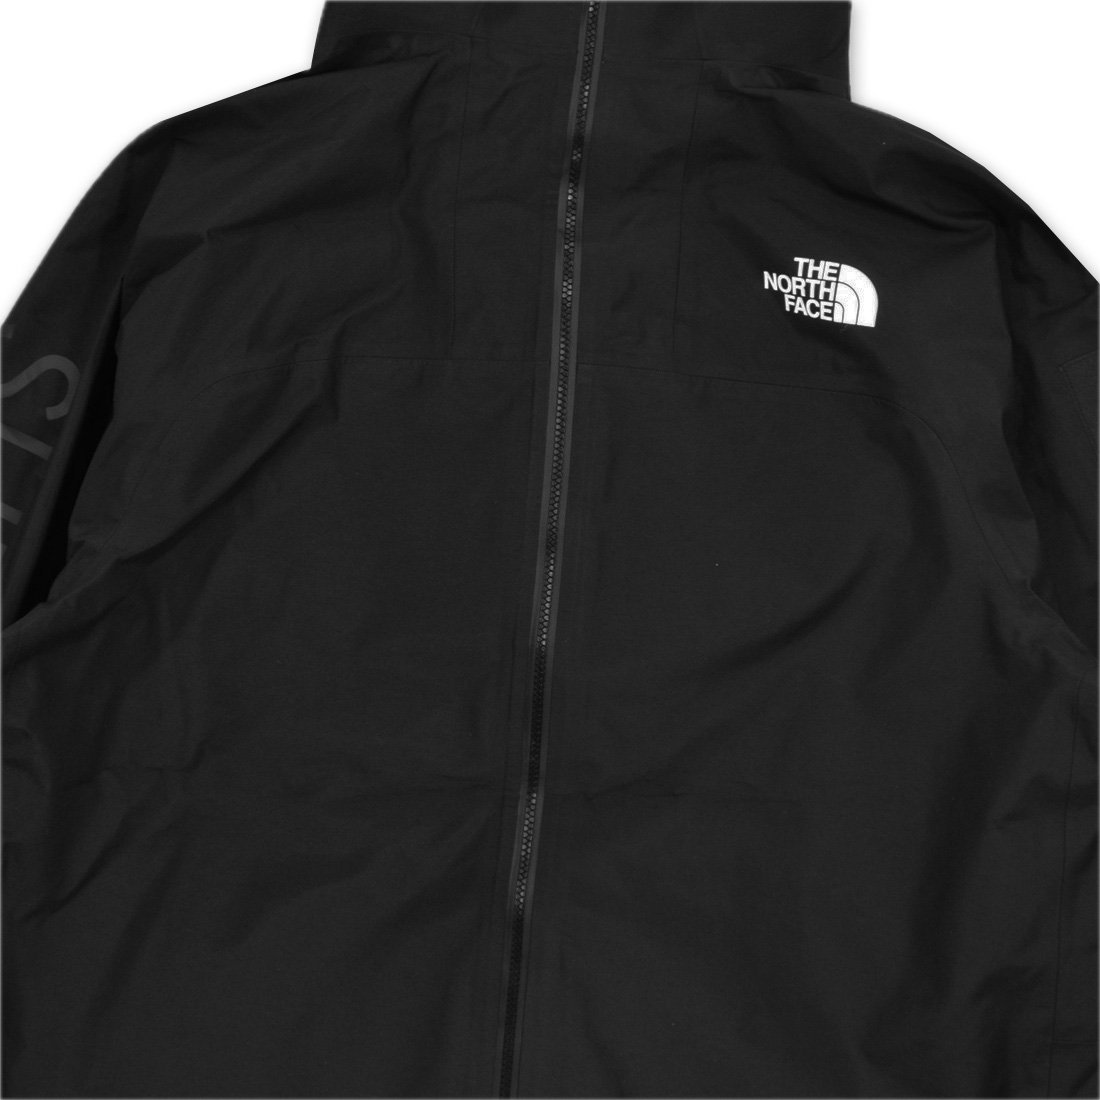 SUPREME X THE NORTH FACE SPLIT TAPED SEAM SHELL JACKET - Spyder 